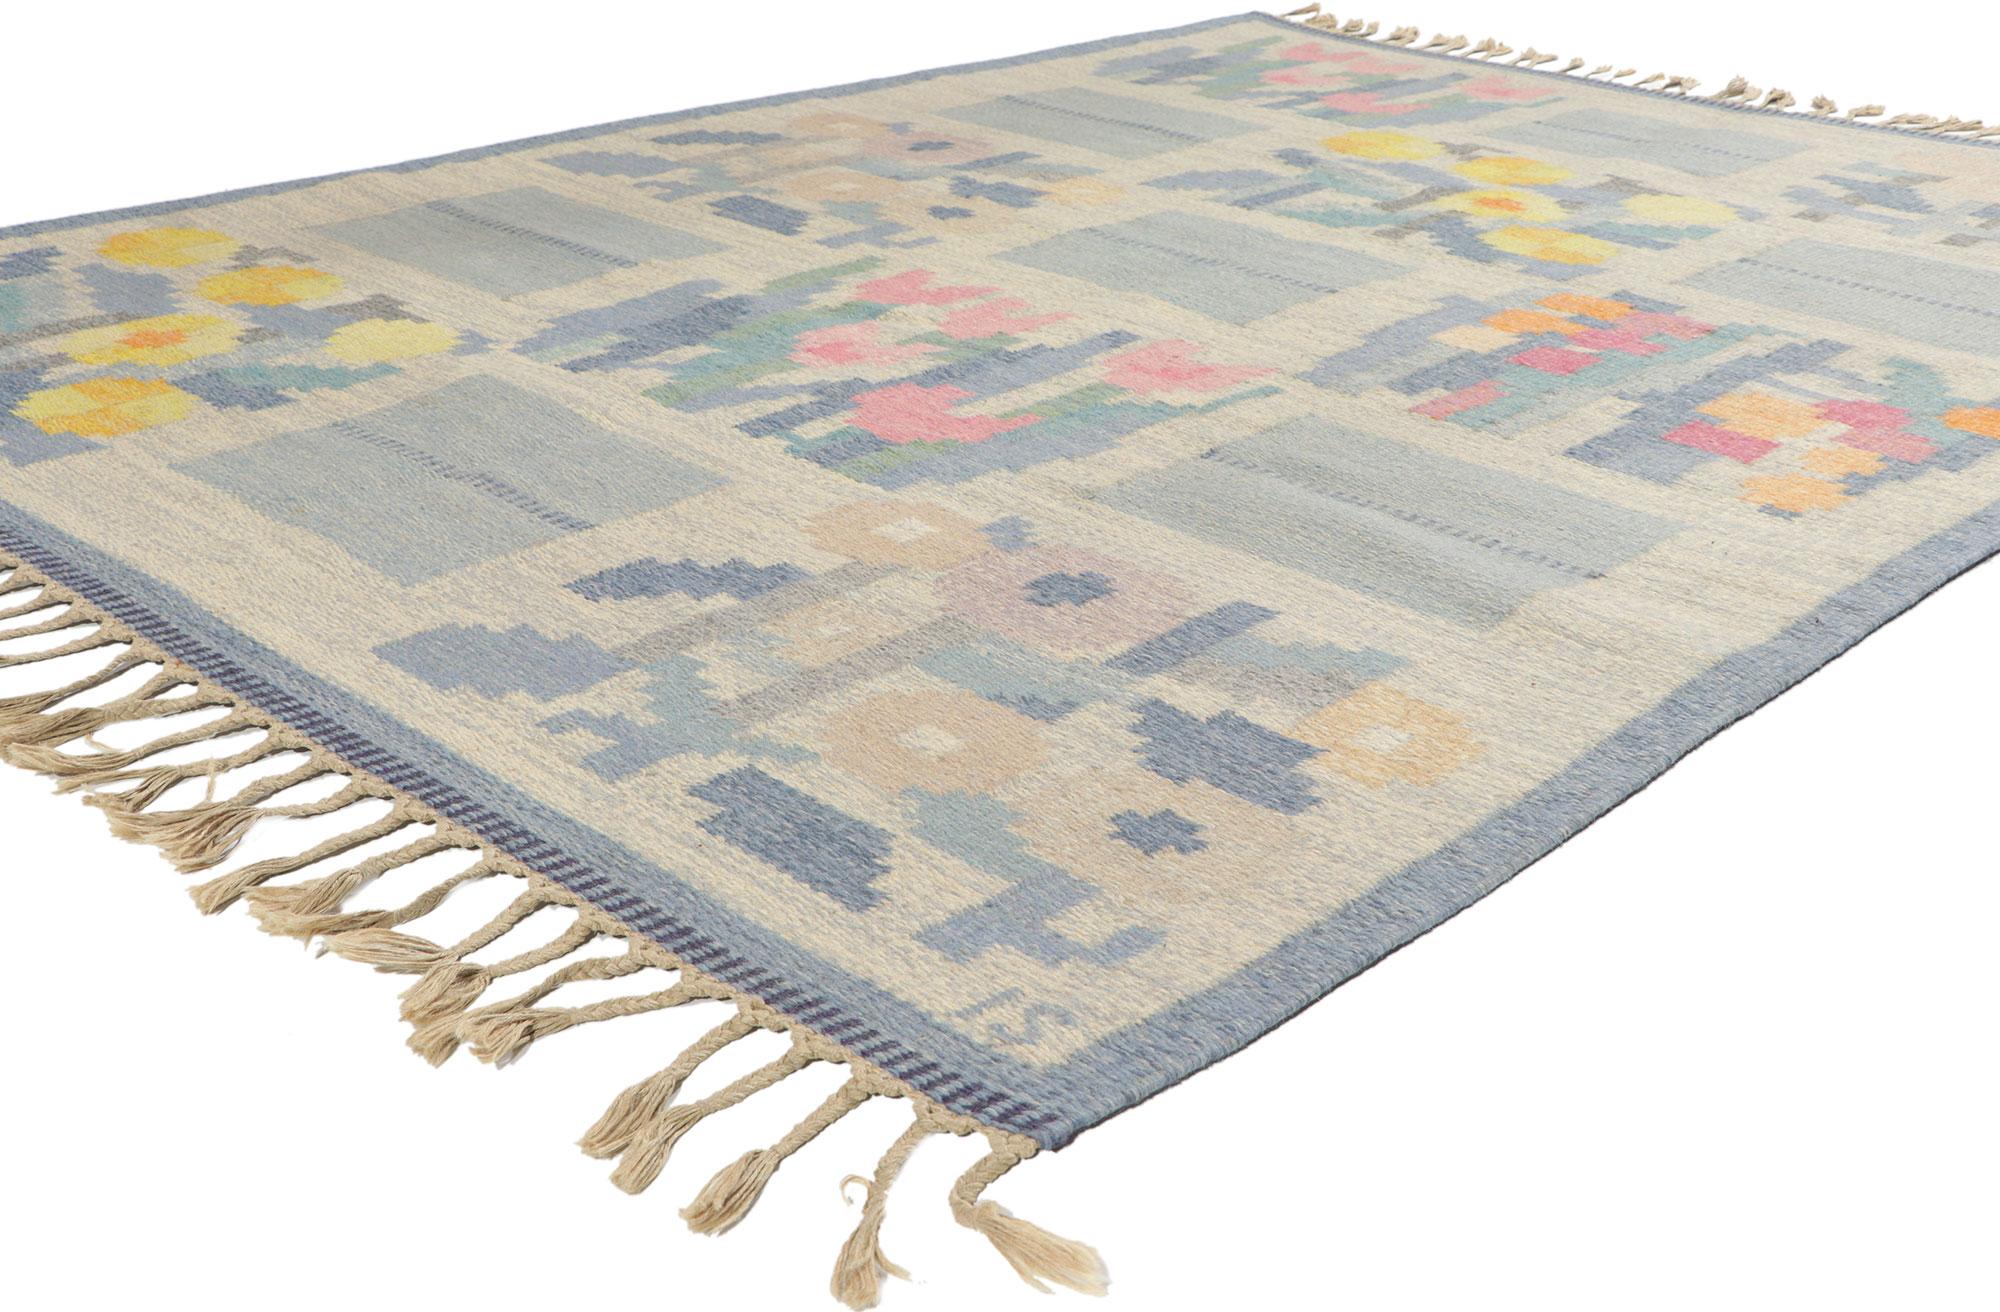 78496 Vintage Swedish Rollakan Rug by Ingegerd Silow, 05'06 x 07'08.
Emanating Scandinavian Modern style with incredible detail and texture, this handwoven Swedish rollakan rug is a captivating vision of woven beauty. The eye-catching floral